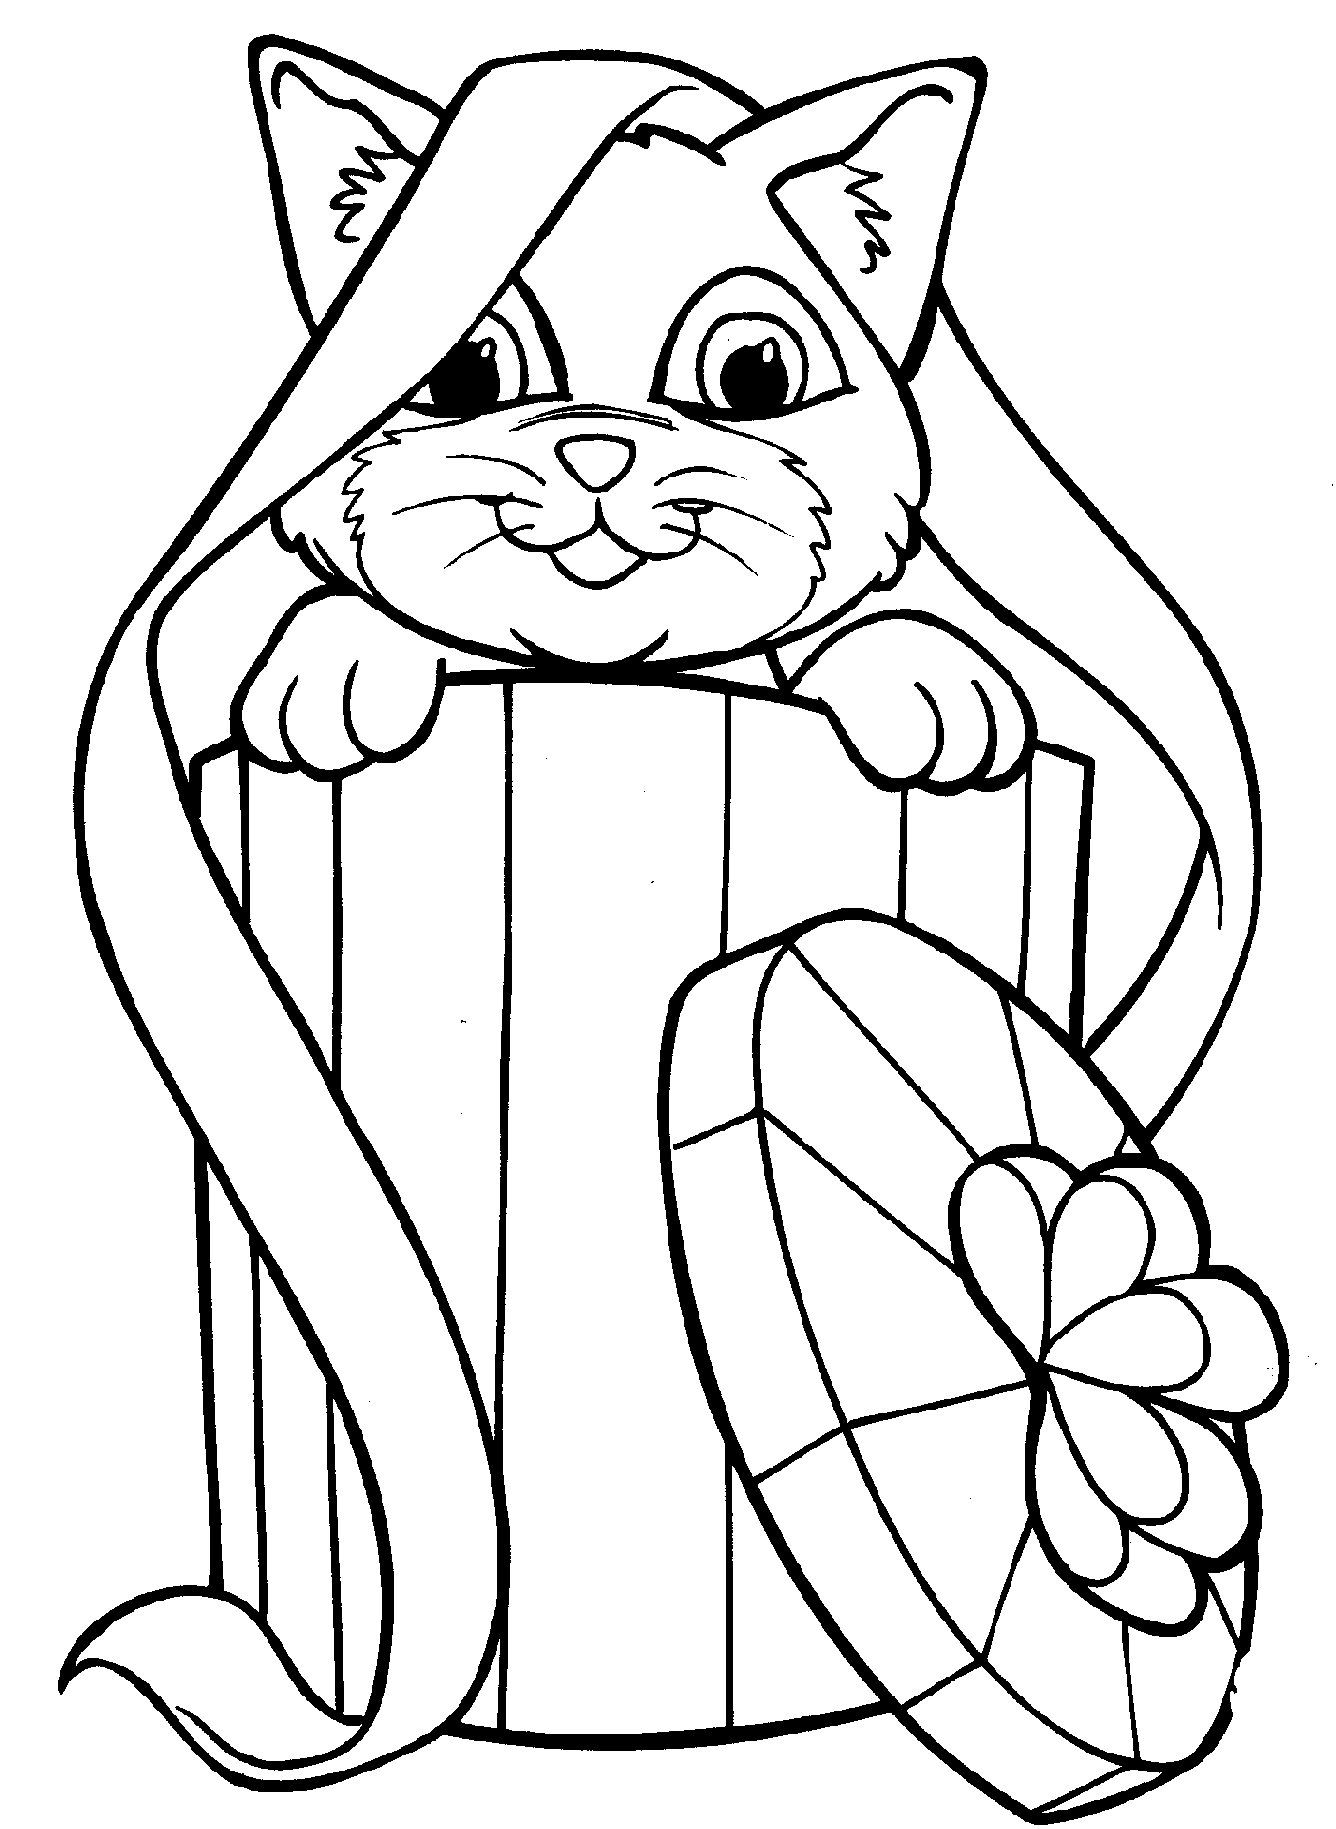 coloring pages of kittens to print free printable kitten coloring pages for kids best pages print coloring of kittens to 